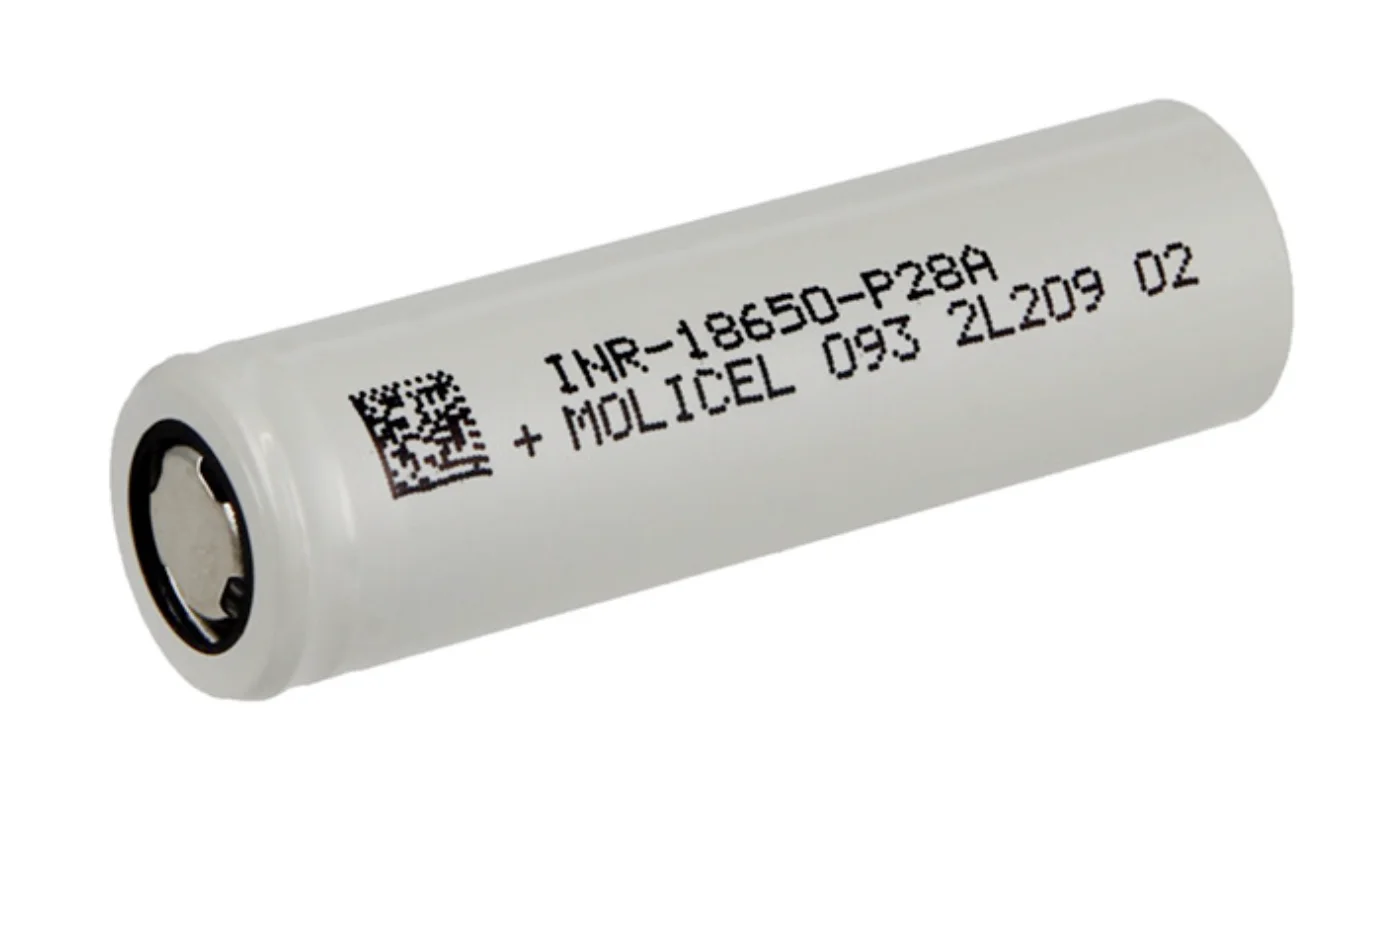 P28A Taiwan Molicel 18650 Battery 3.7V 2800mAh 35A Rechargeable Lithium Ion Battery For Molicel P28A details